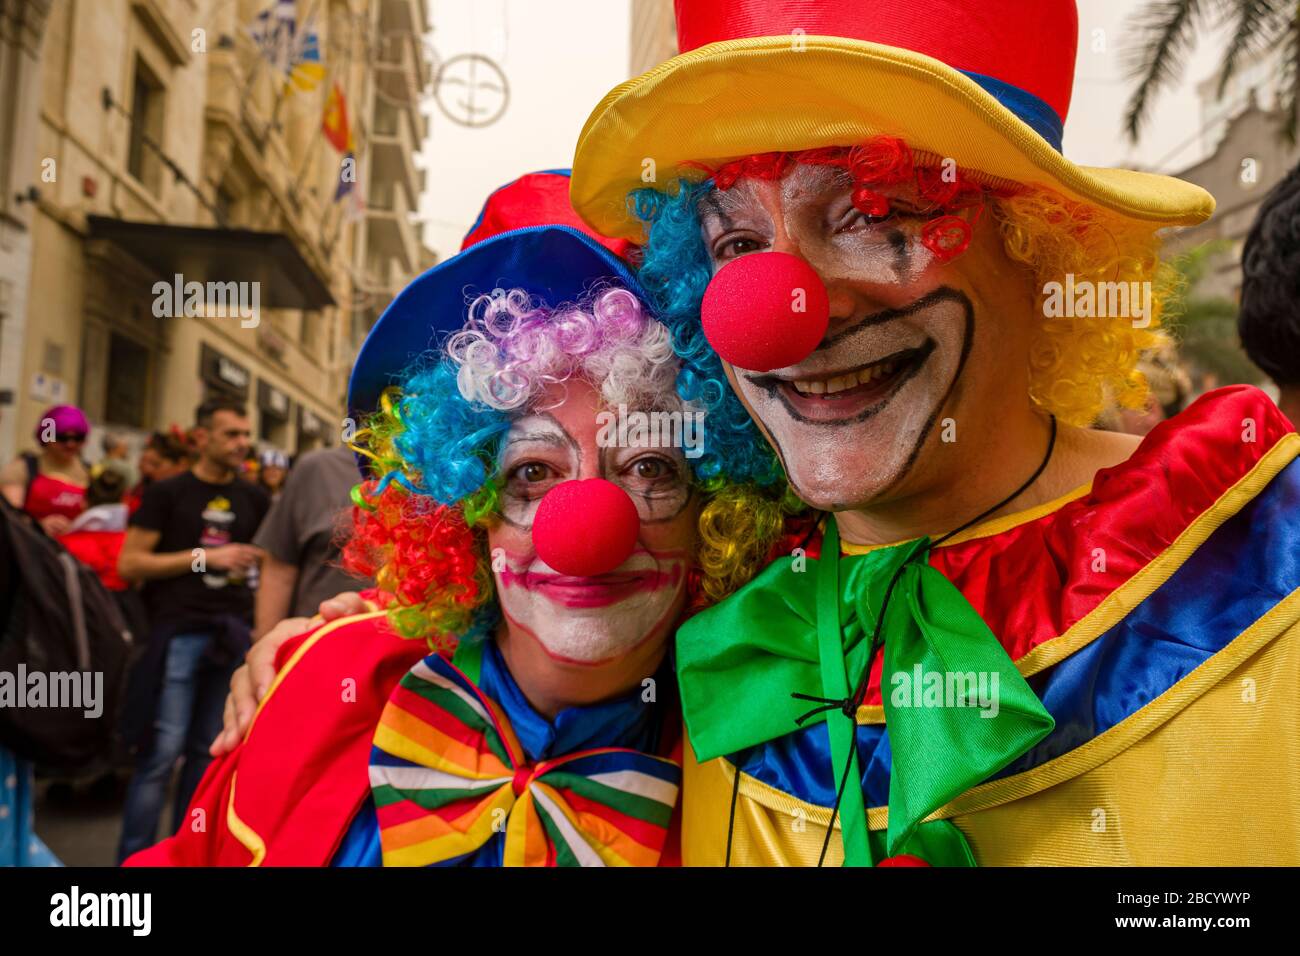 A man and a woman, dressed up as clowns and smiling, partying in the streets during the Daytime Carnival Stock Photo